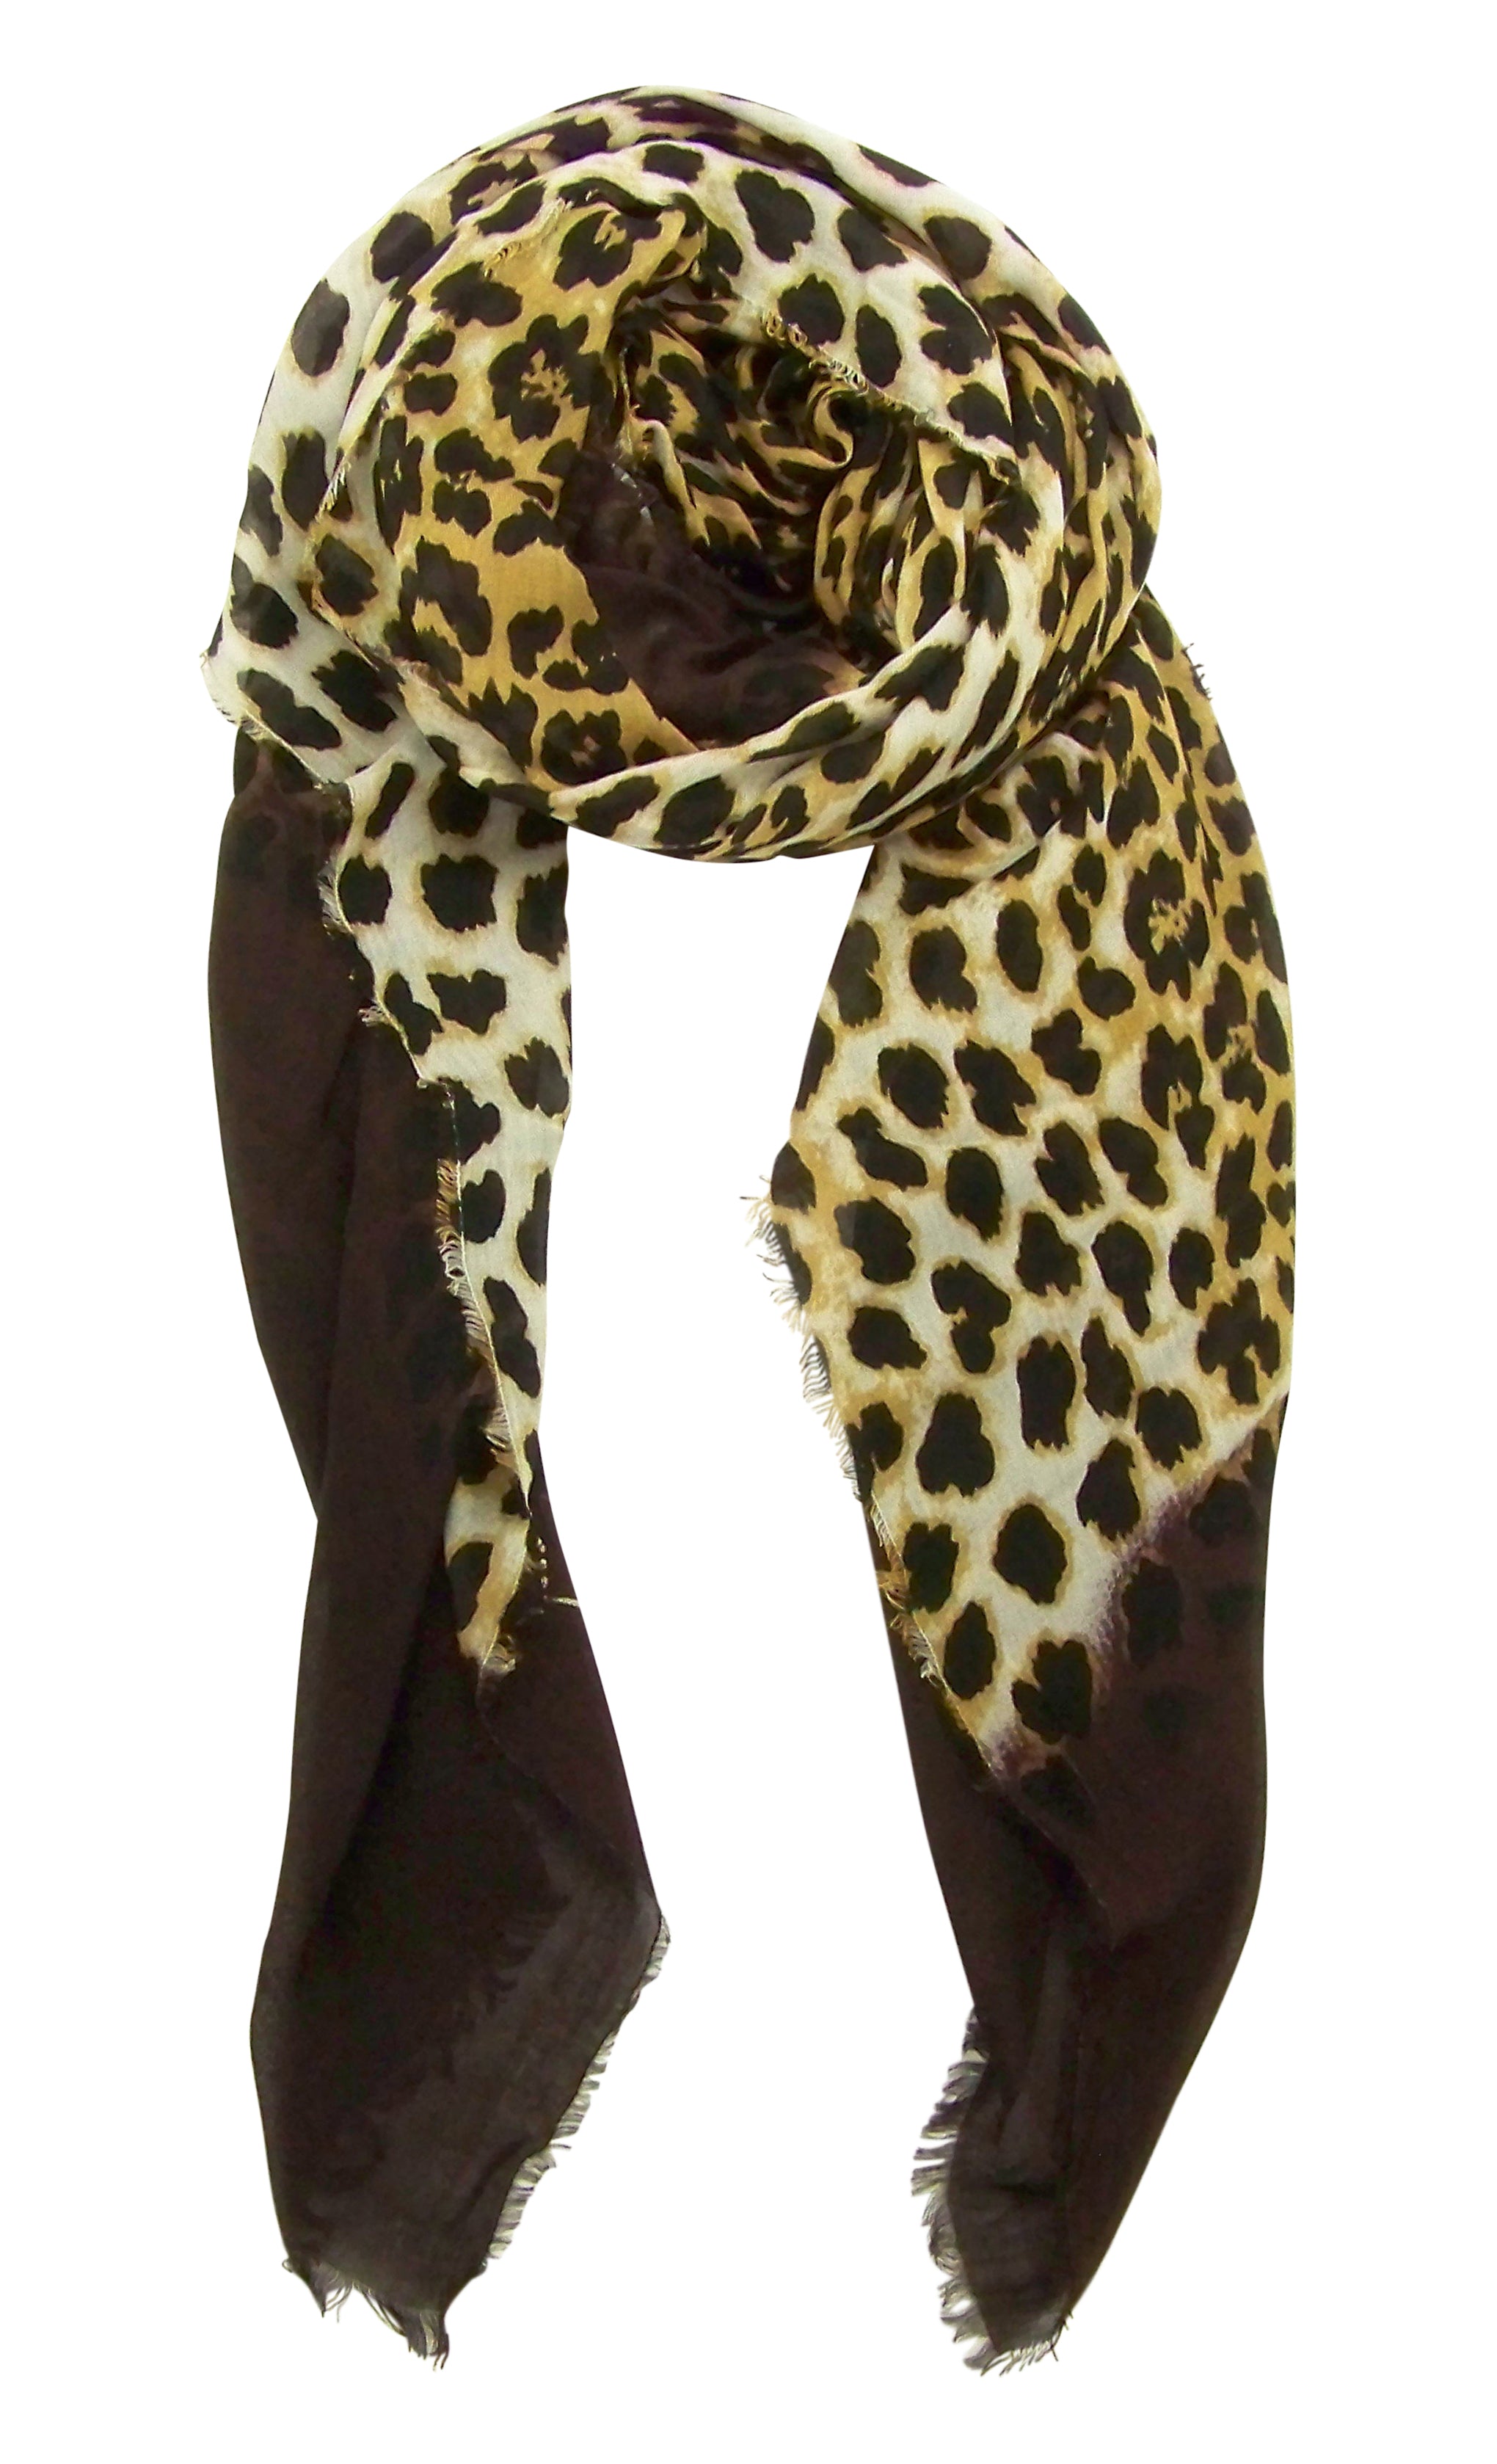 Primary Rolled View Blue Pacific Animal Print Dip Cashmere and Silk Scarf in Dark Coffee Brown and Tan